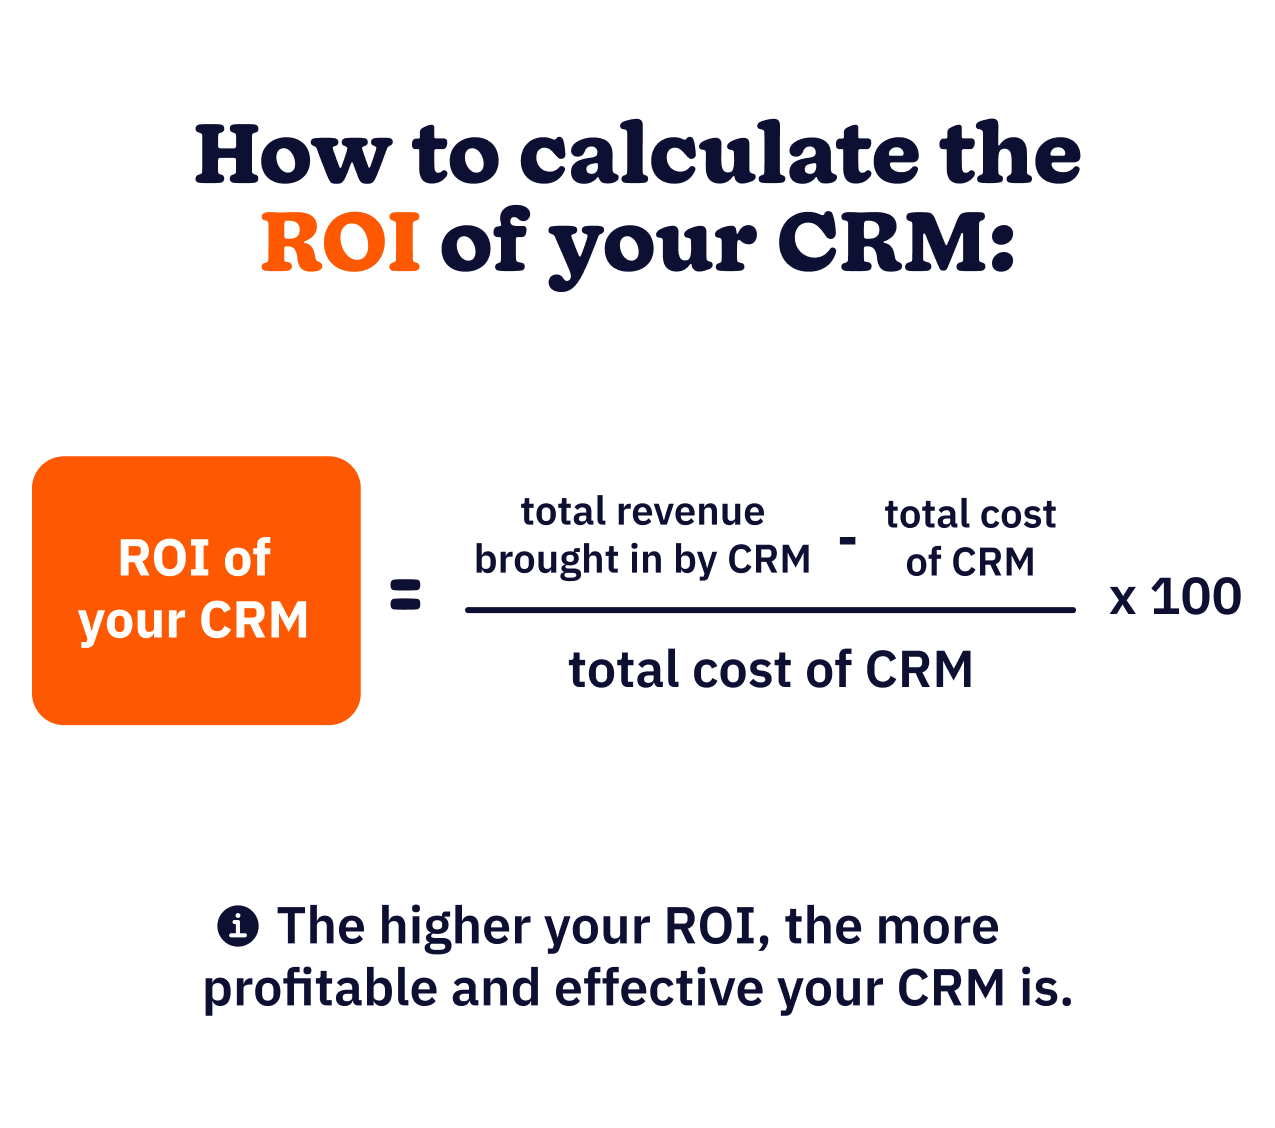 How to calculate ROI of your CRM?